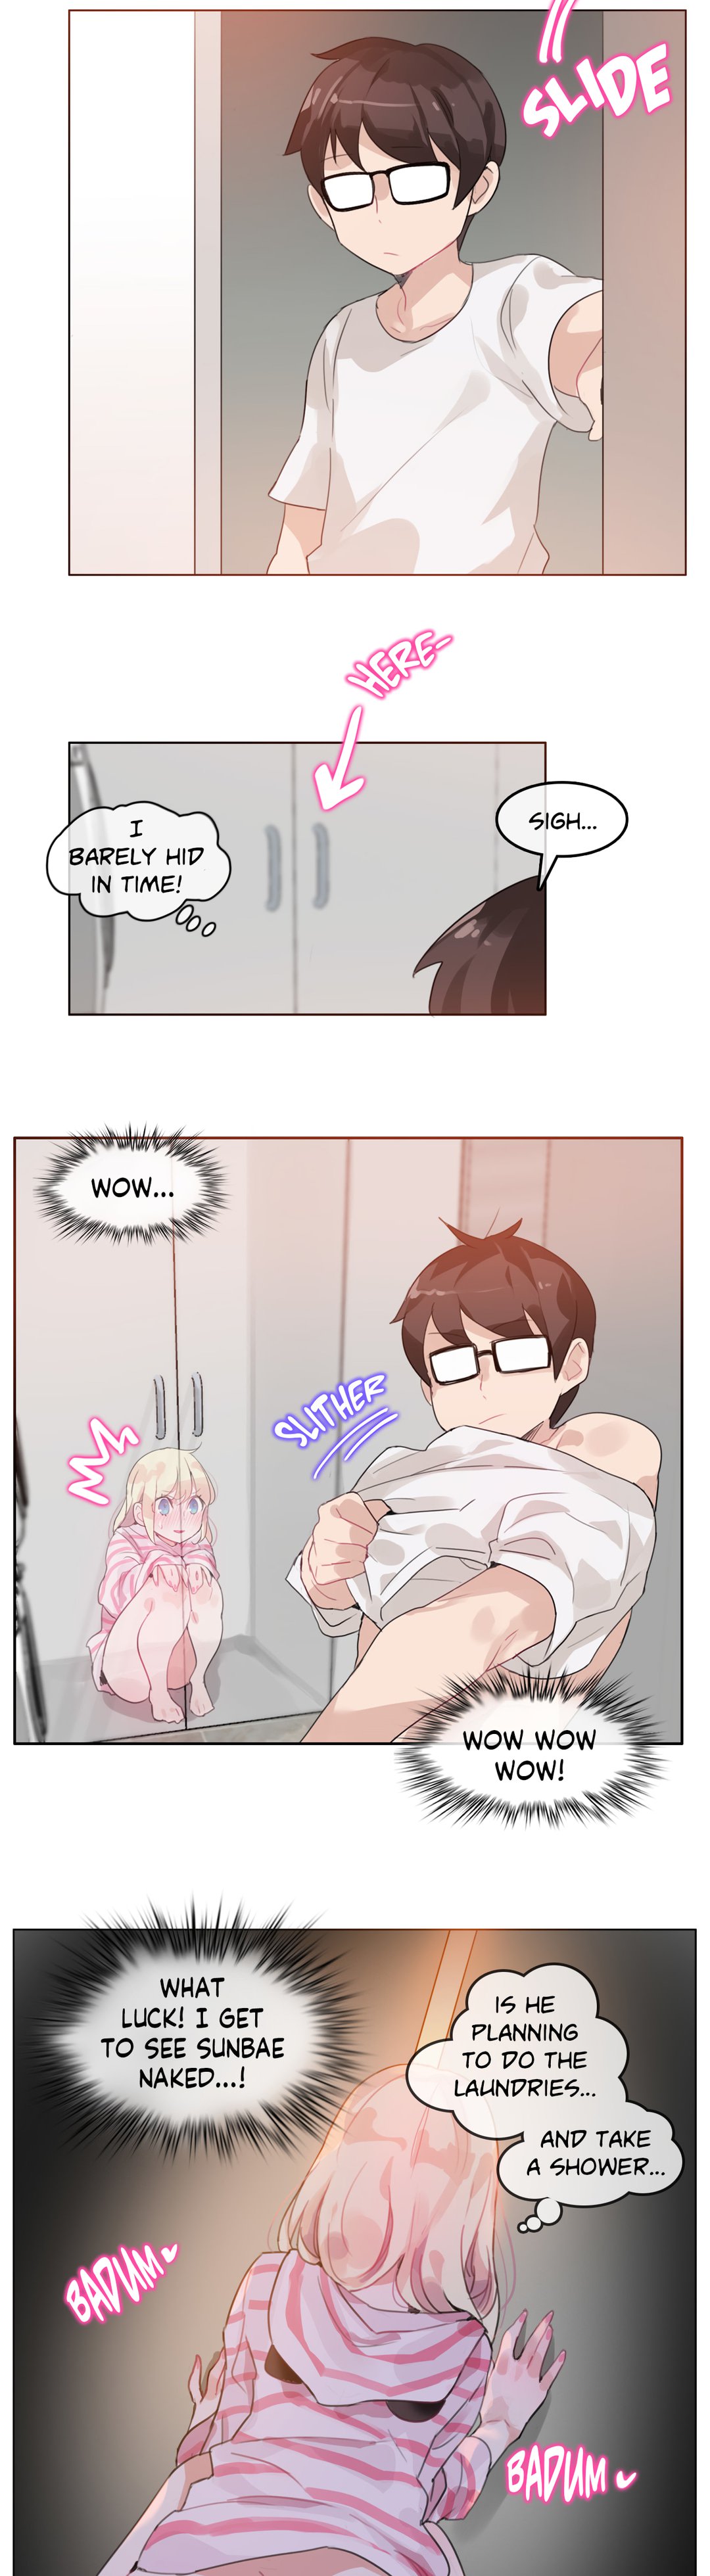 A Pervert's Daily Life - 17 page 9